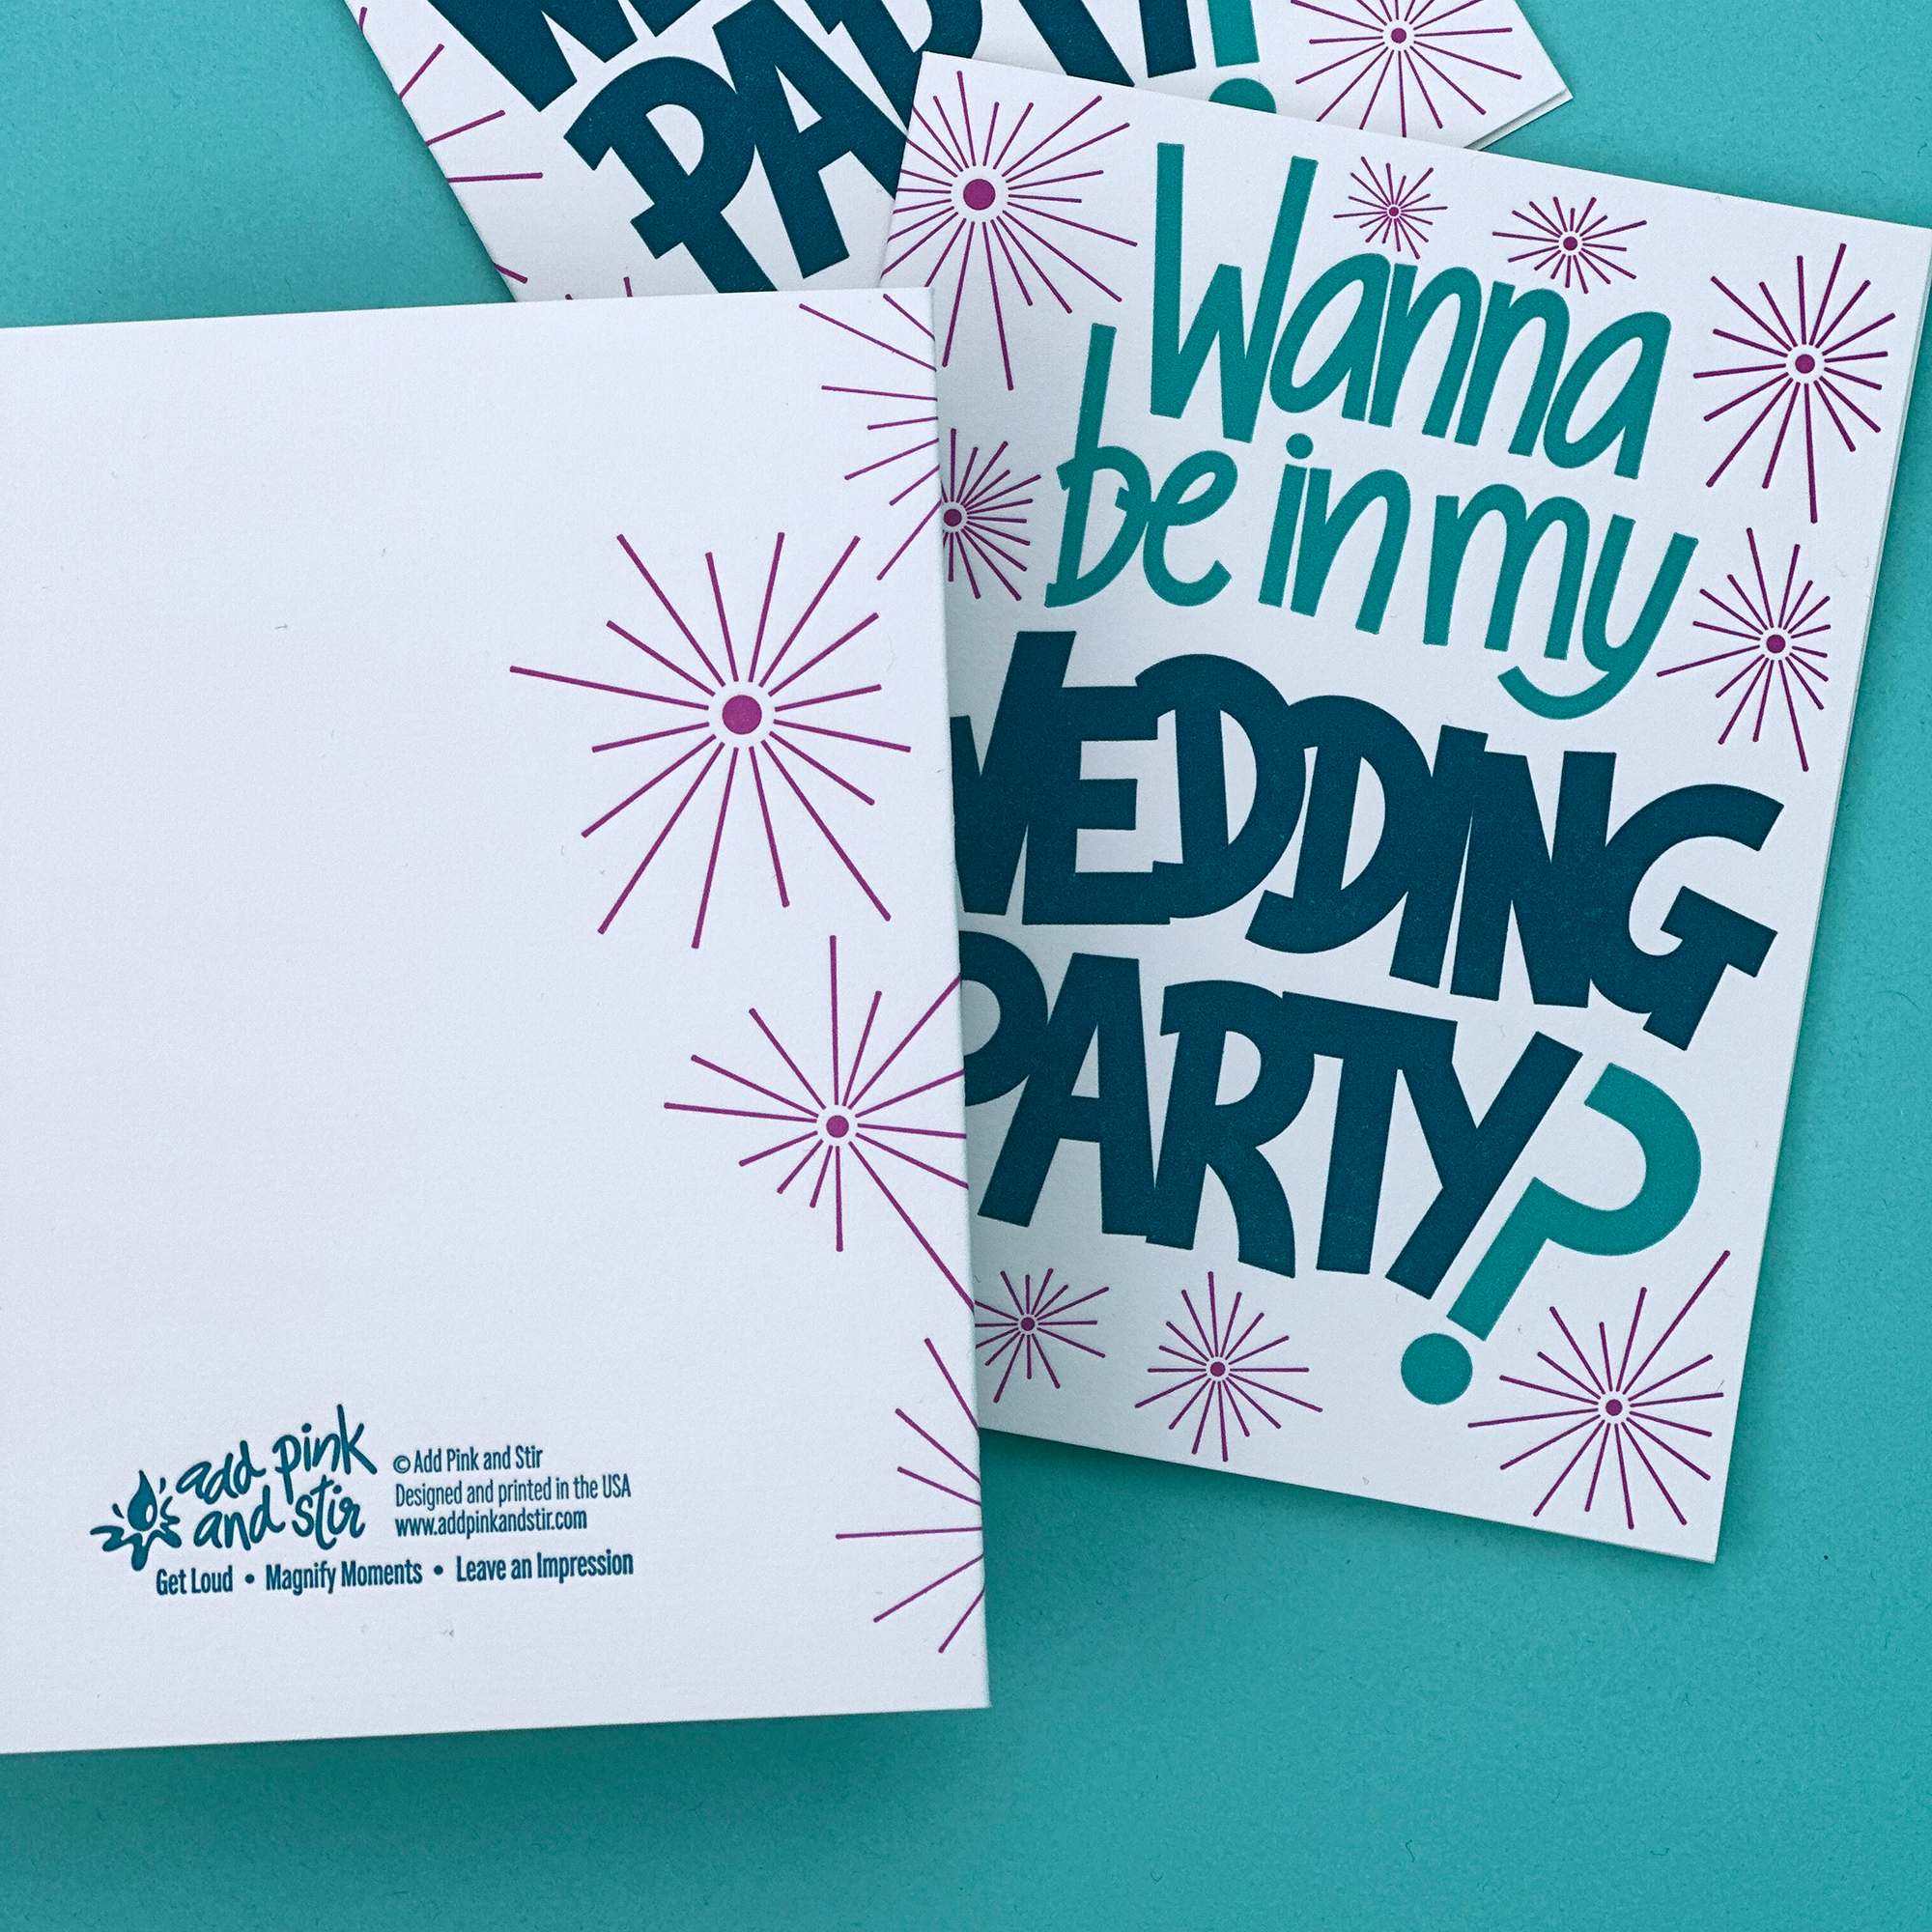 Wedding Party Proposal | Letterpress Greeting Card